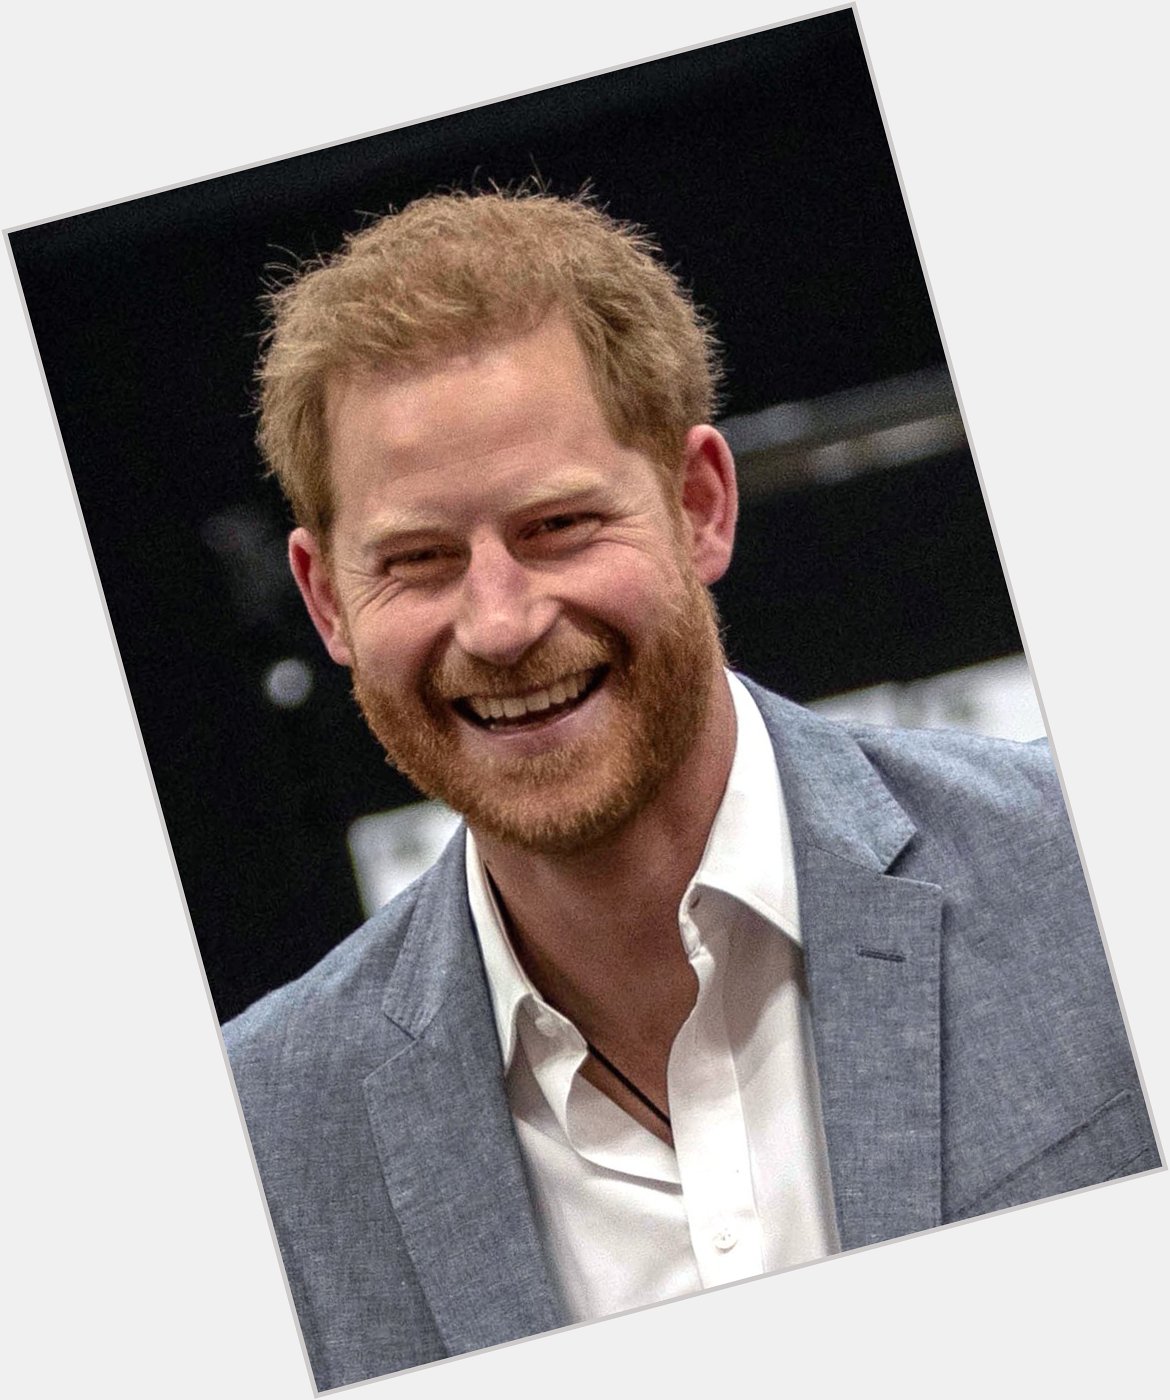  Wishing Prince Harry, The Duke of Sussex a very Happy 37th Birthday today! 